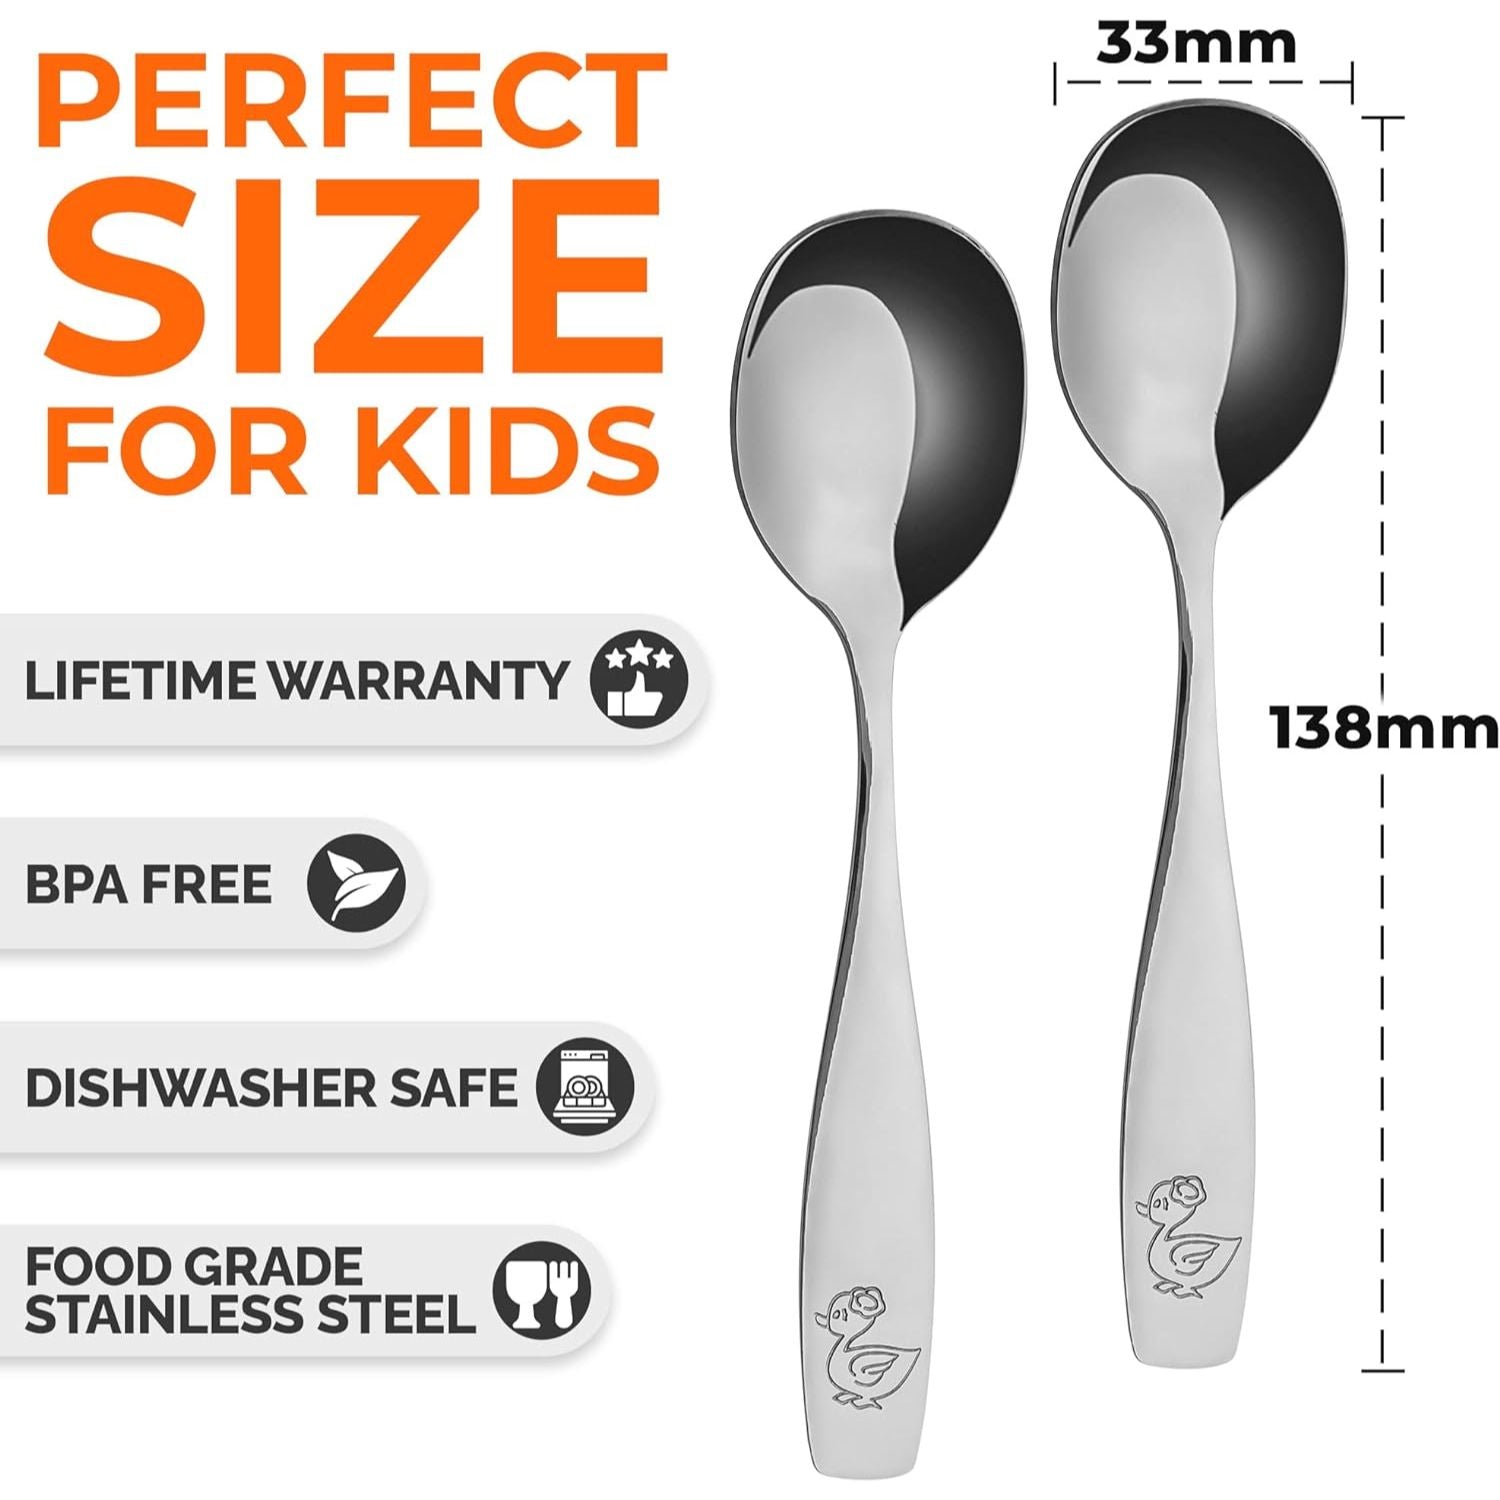 Food grade stainless steel Flatware Set Spoons & Forks for Toddlers